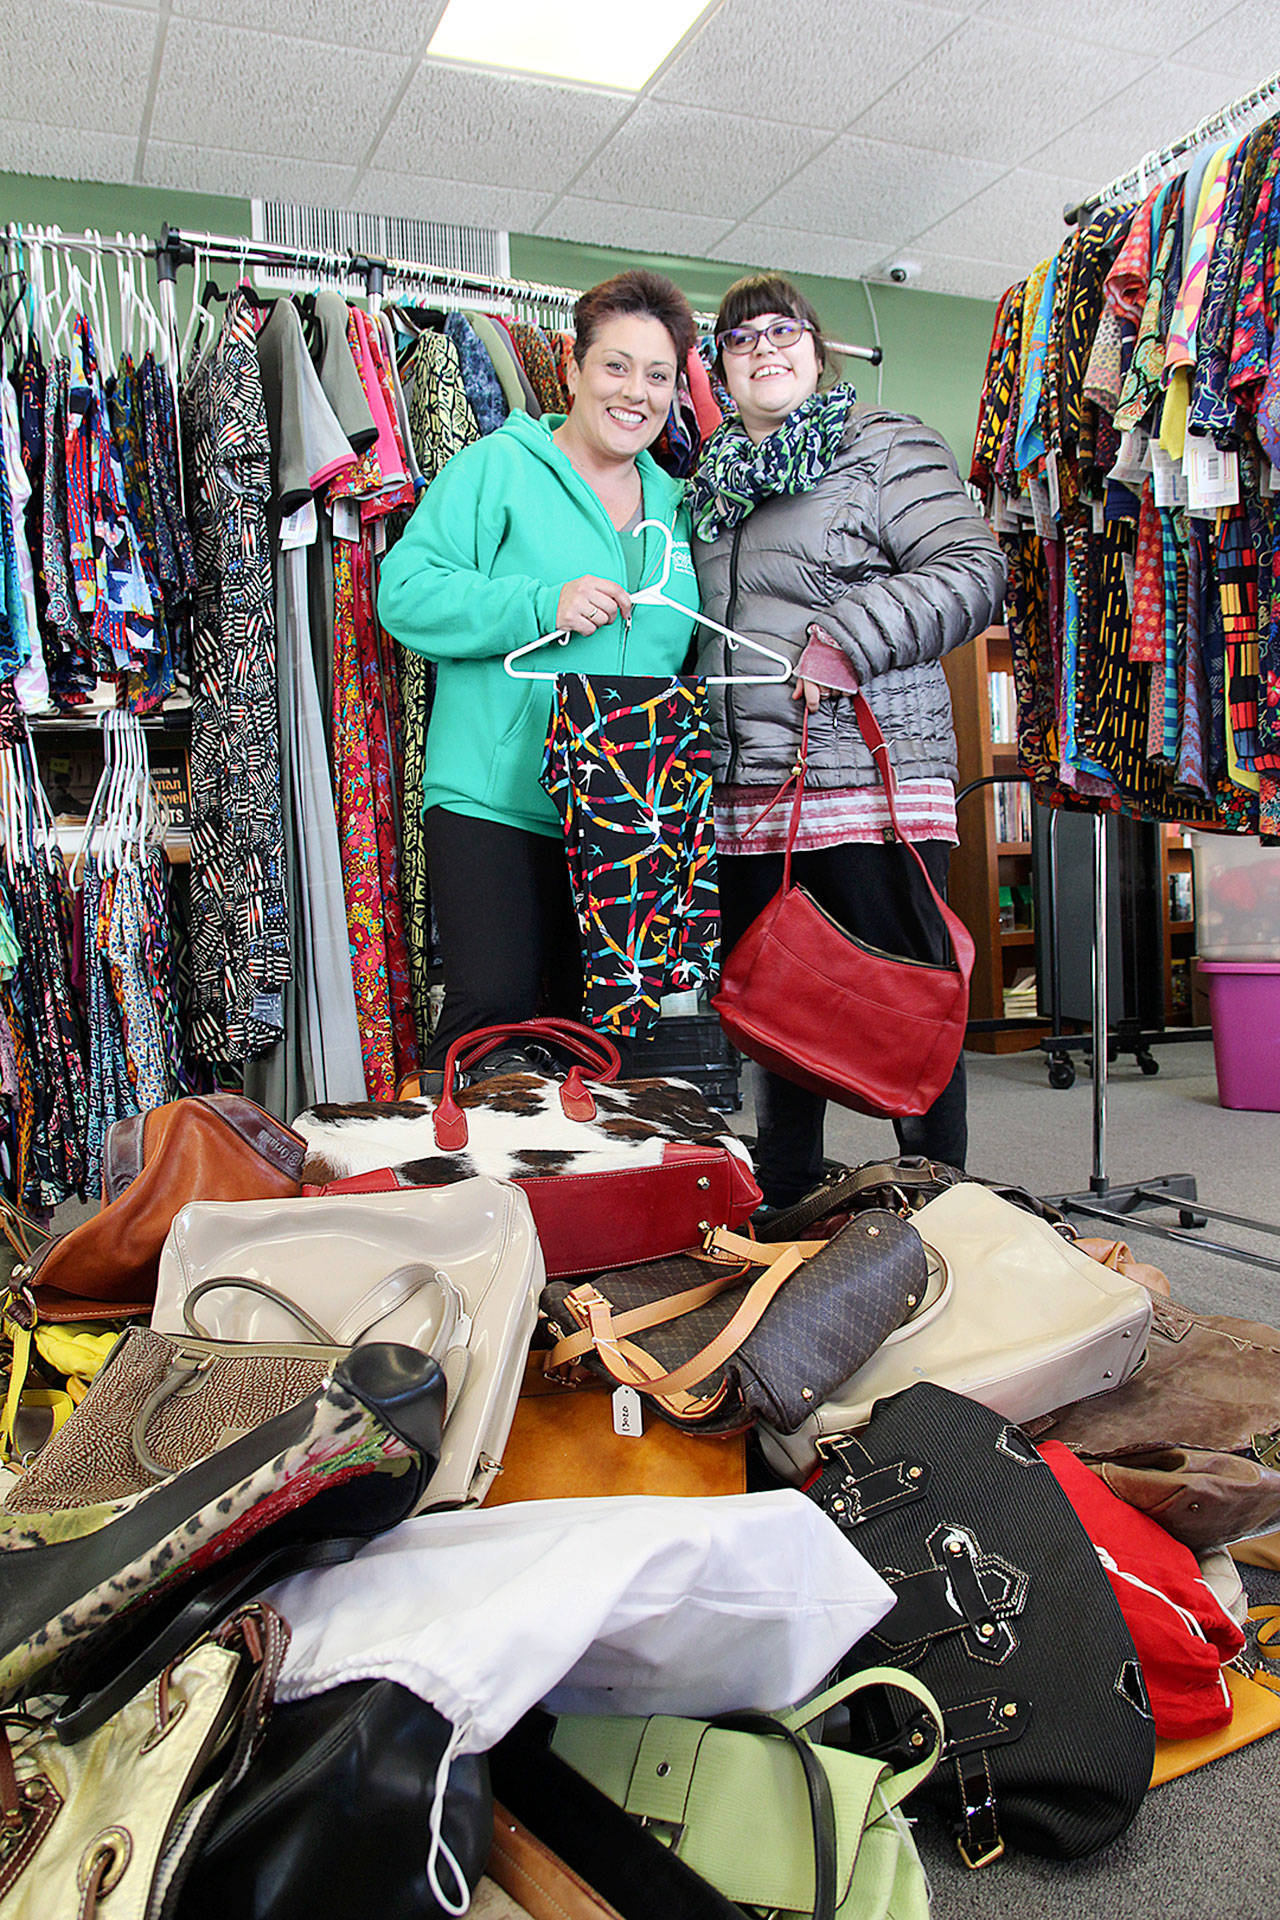 Garage of Blessings founder Kristiina Miller and her daughter Chloe Miller stand surrounded by recently donated purses and clothing. The items will be given away at a special event on Jan. 19. Photo by Laura Guido/Whidbey News-Times